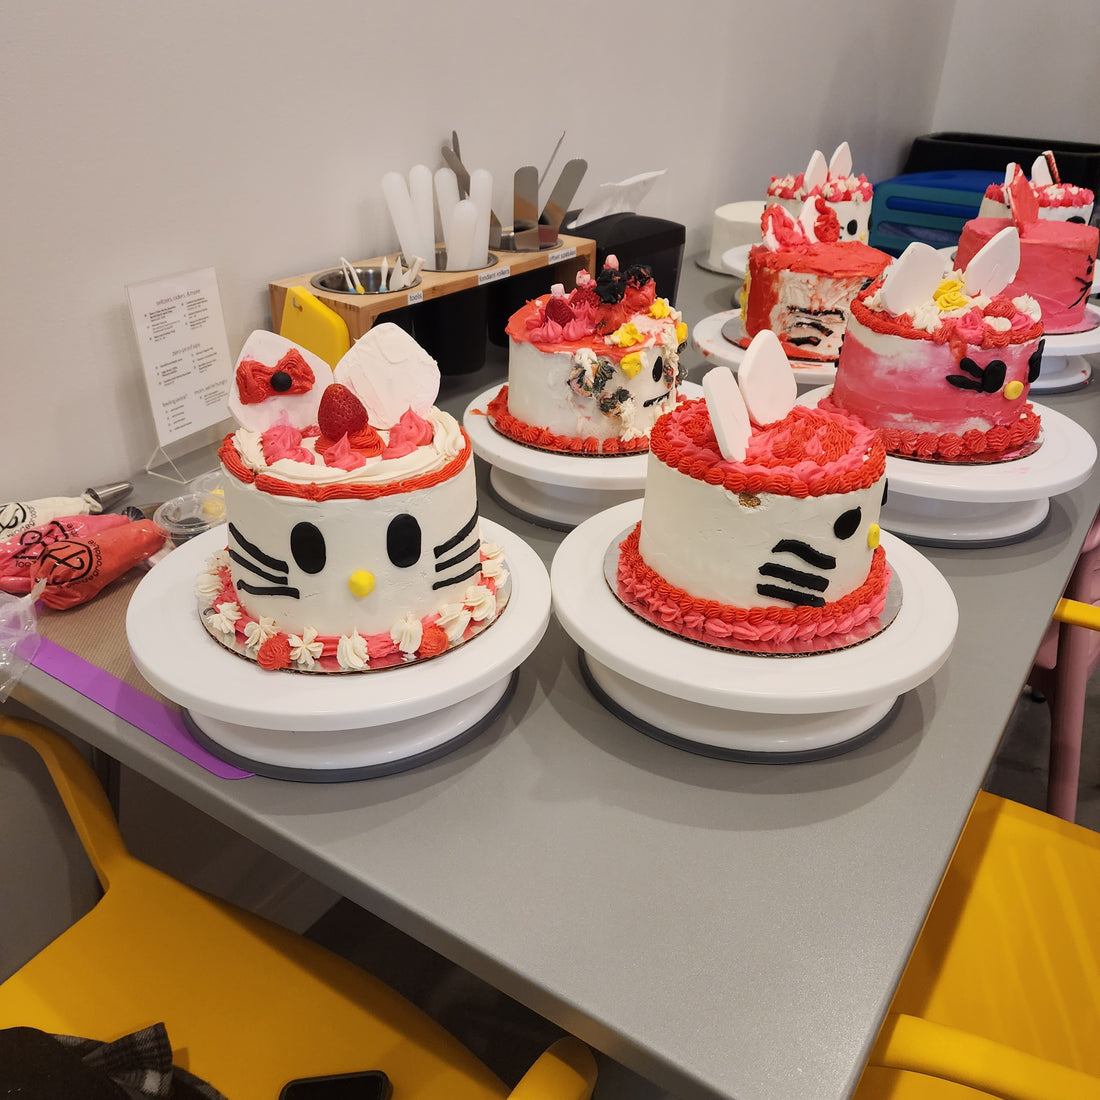 A table filled with custom Hello Kitty cakes decorated during a DIY cake-decorating party, each unique.